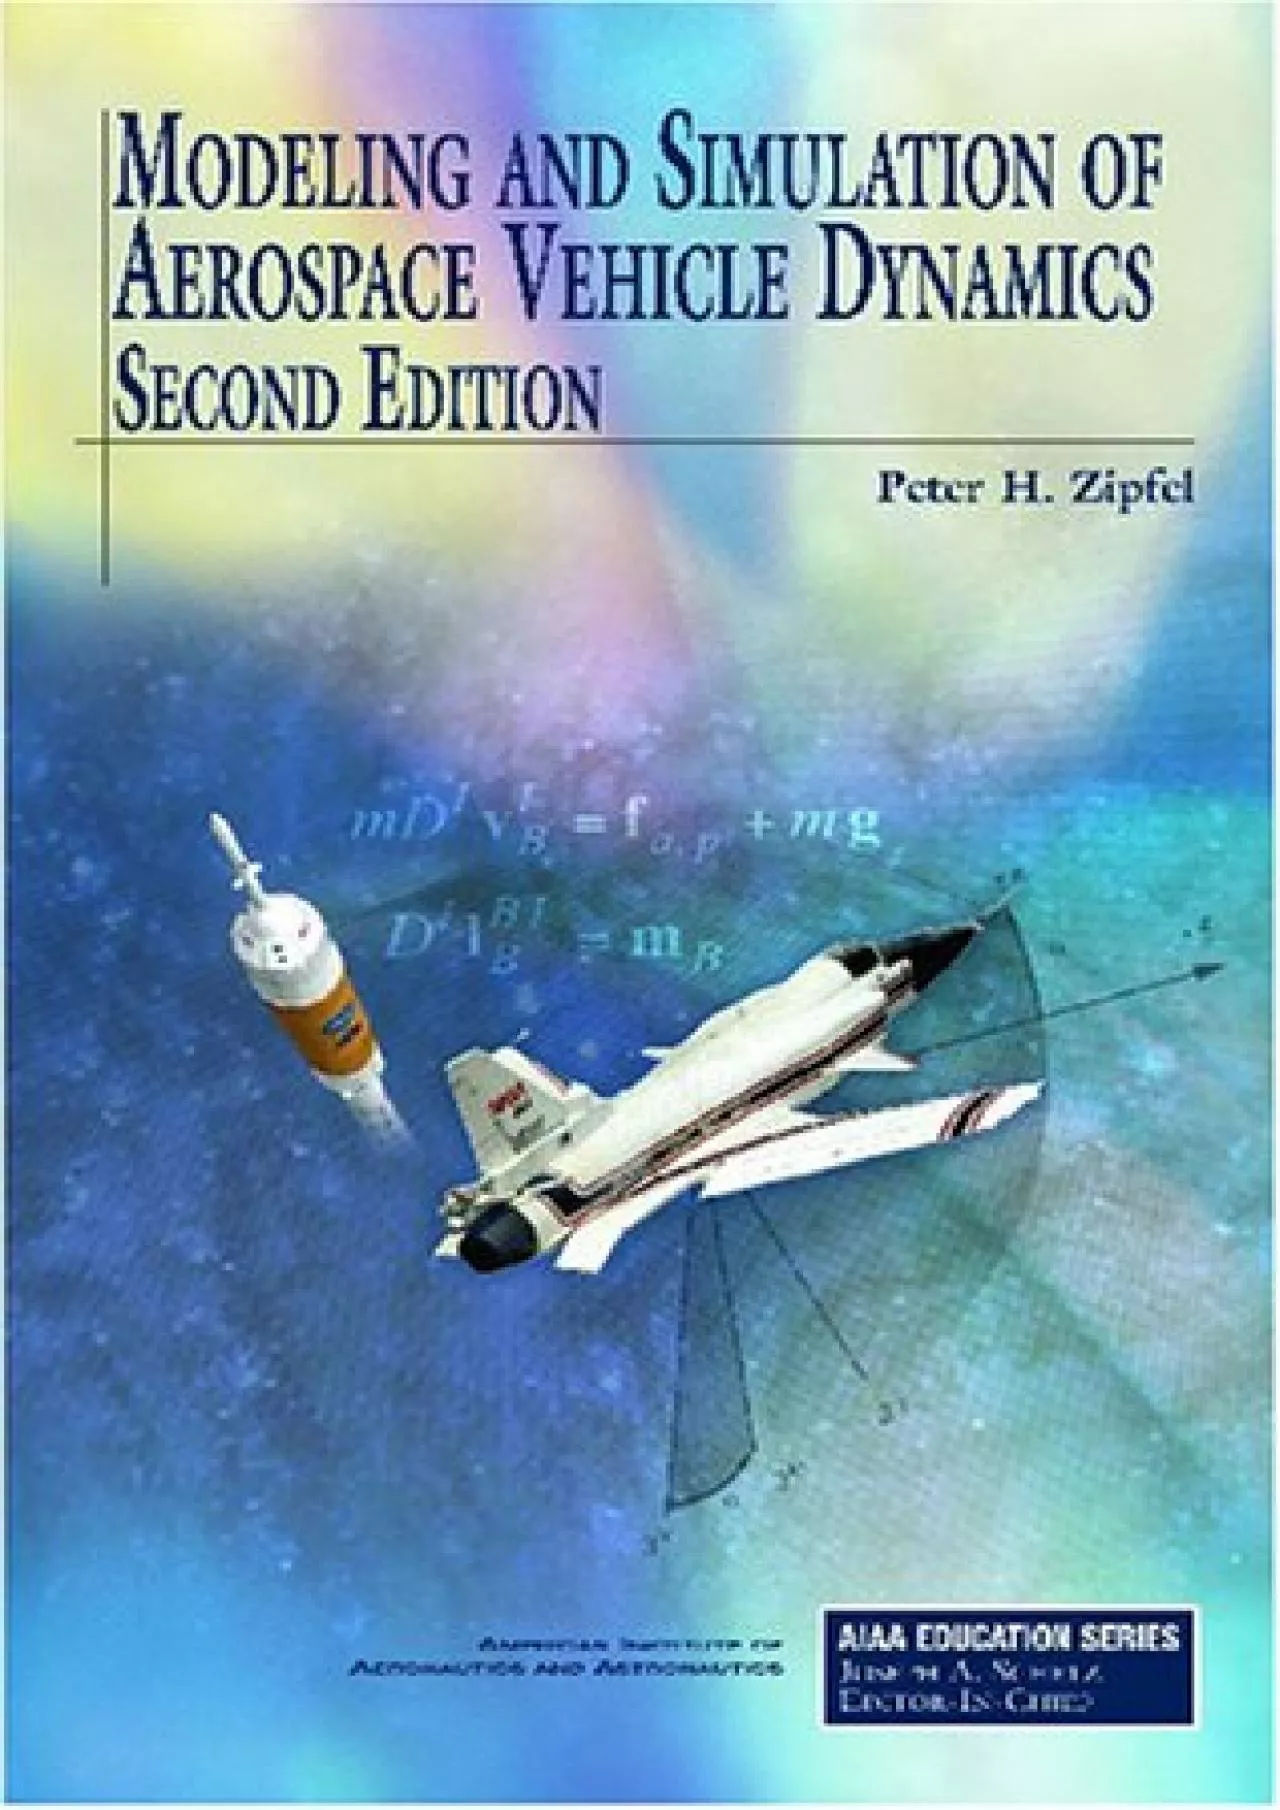 (BOOK)-Modeling and Simulation of Aerospace Vehicle Dynamics, Second Edition (AIAA Education